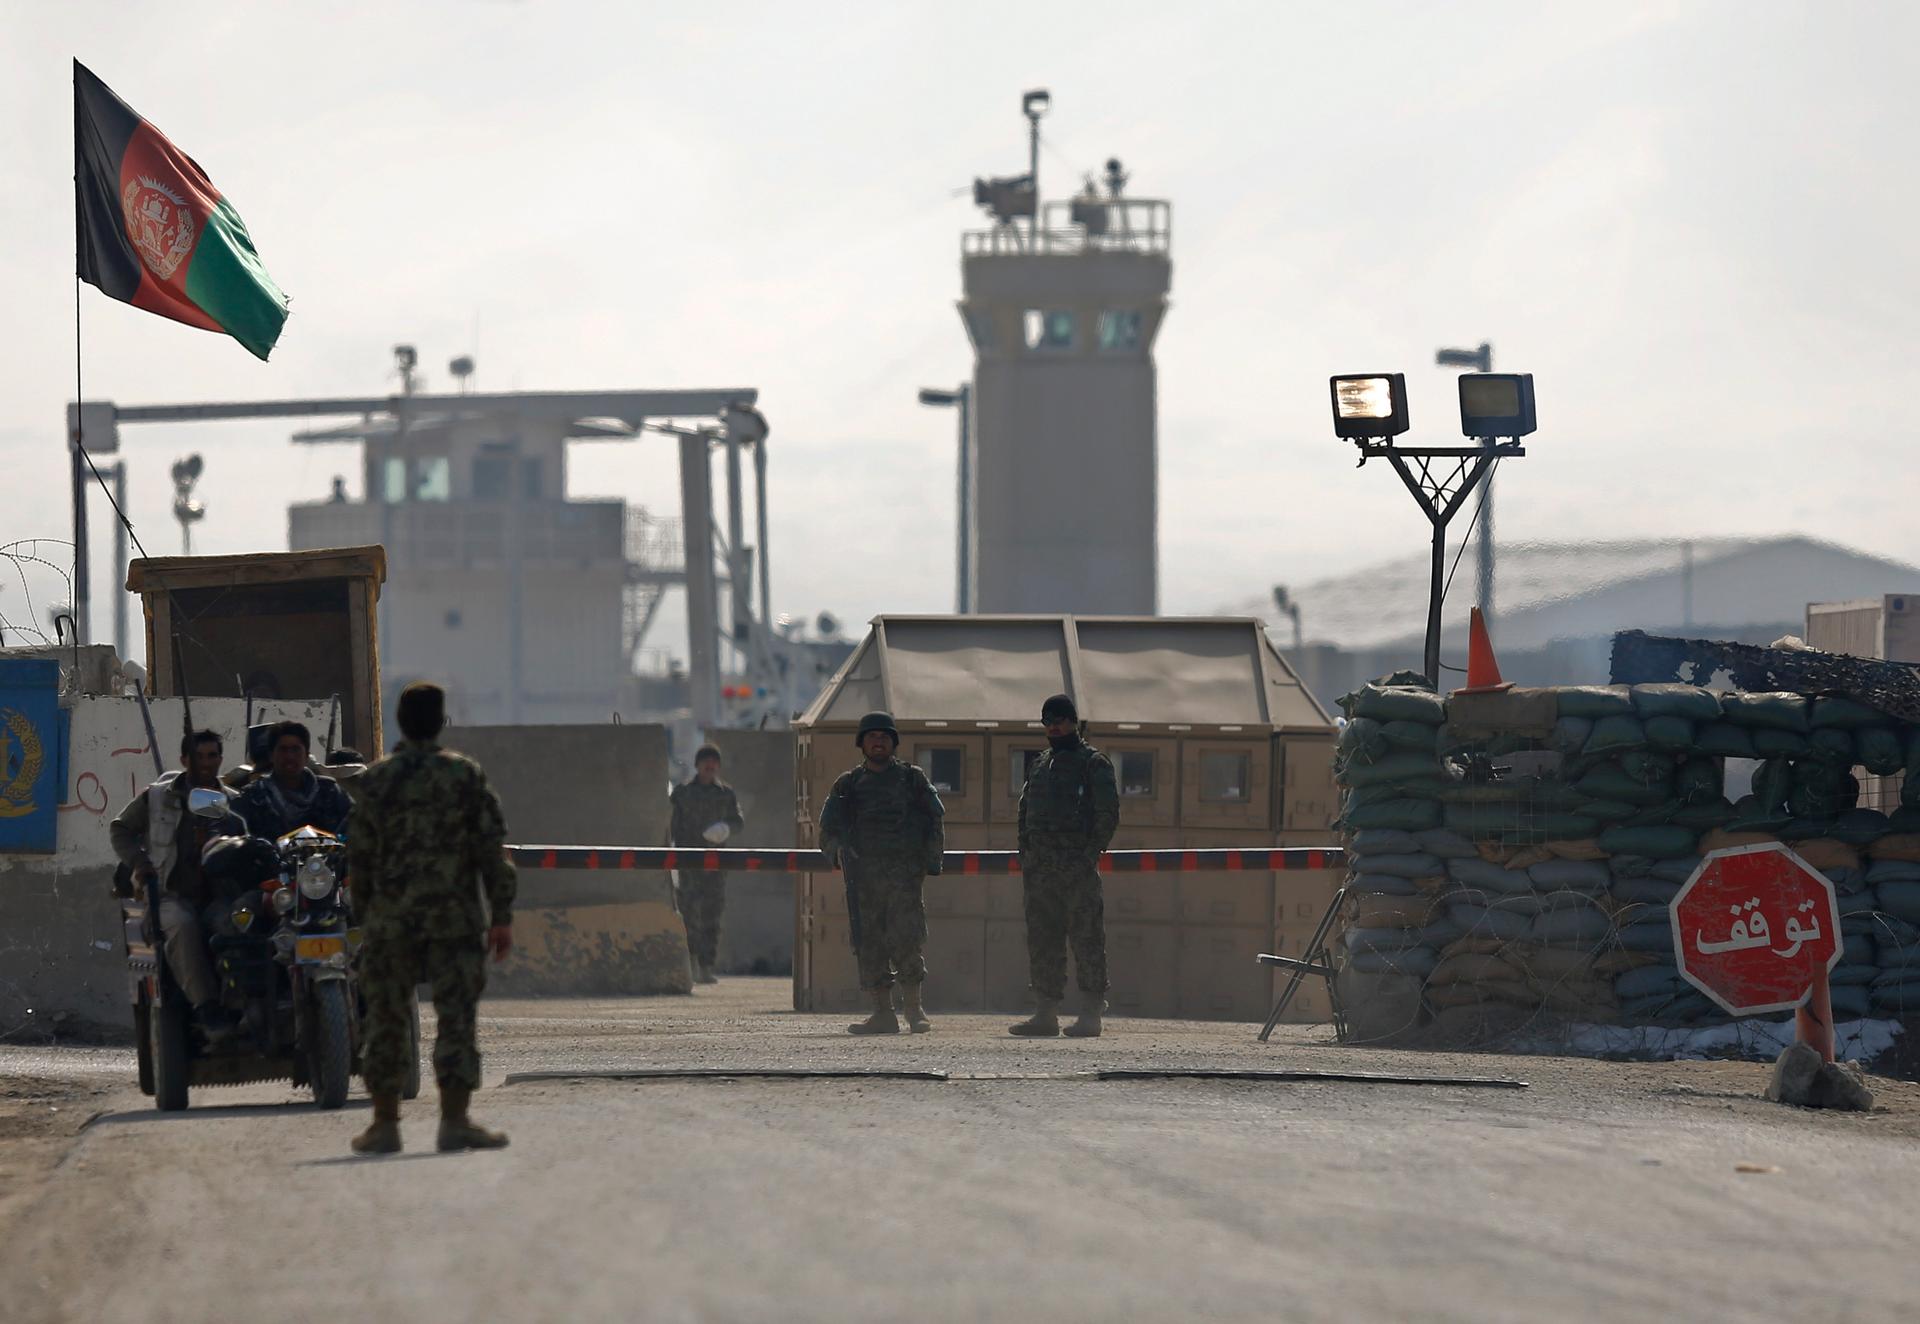 Afghan National Army soldiers on guard at the gate of the Bagram detainee centre, north of Kabul.